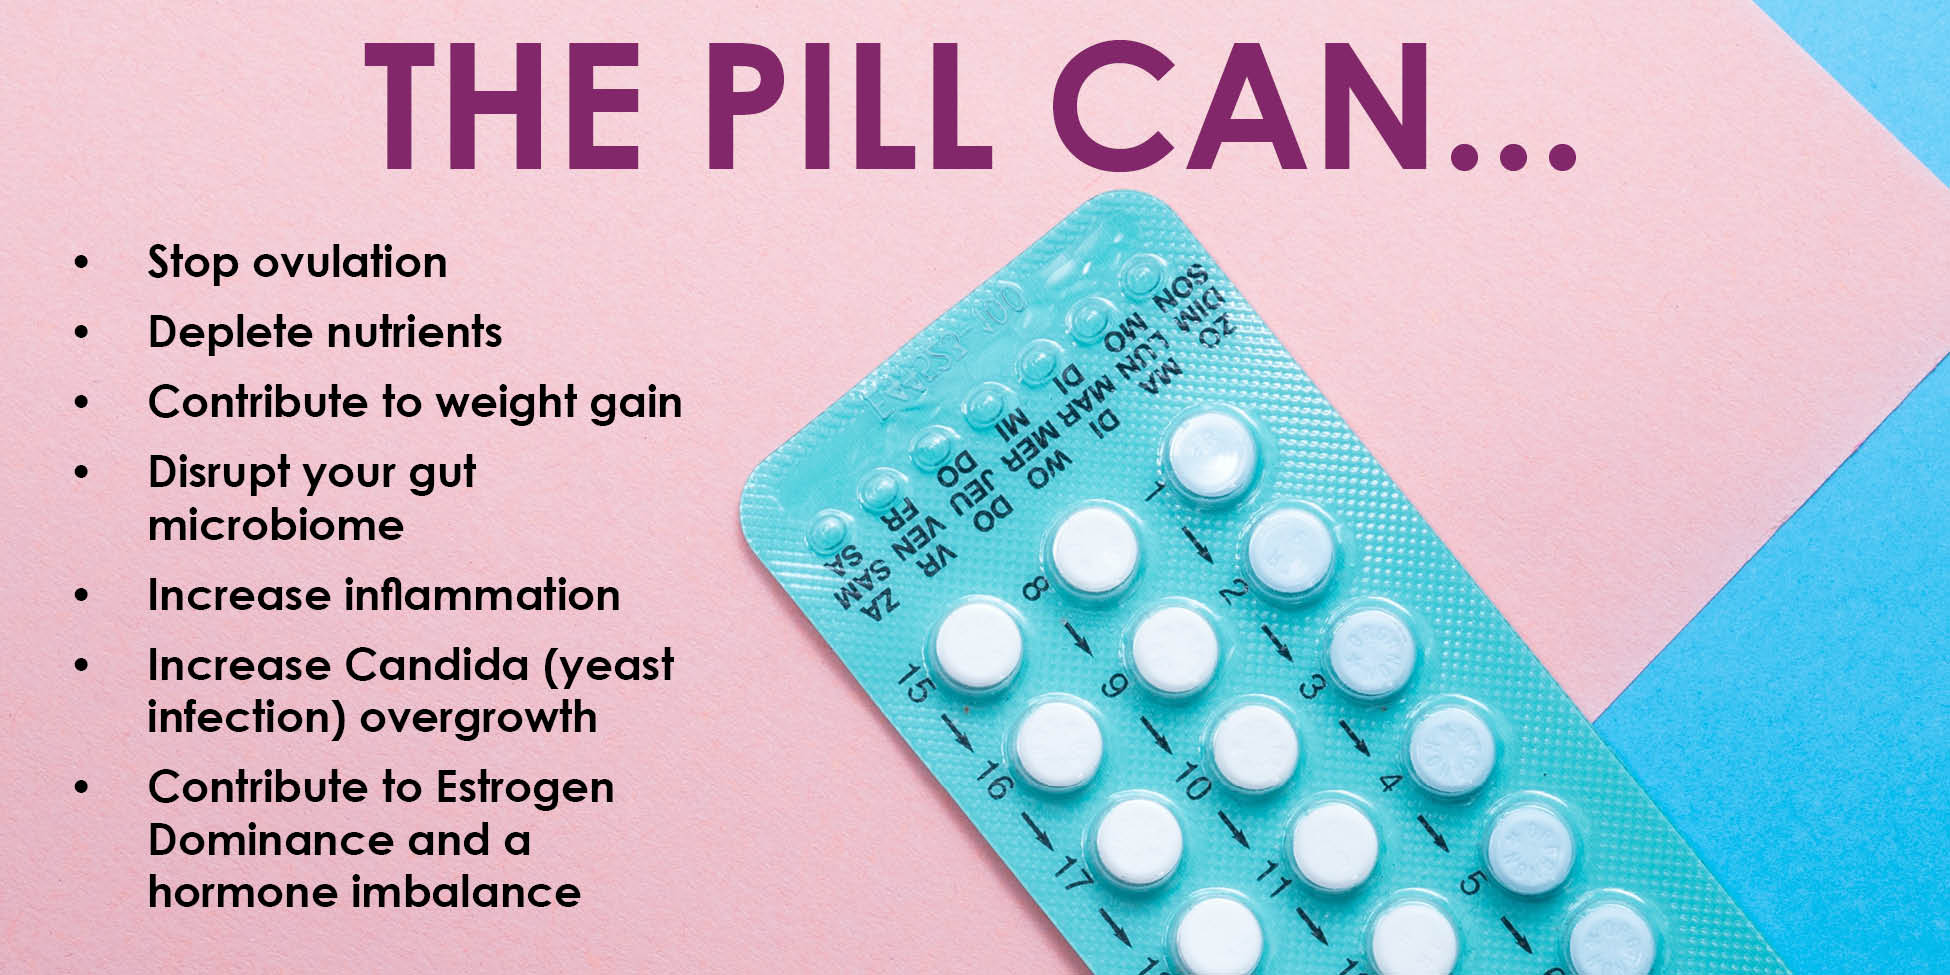 Birth control pill packet with side effects of taking it